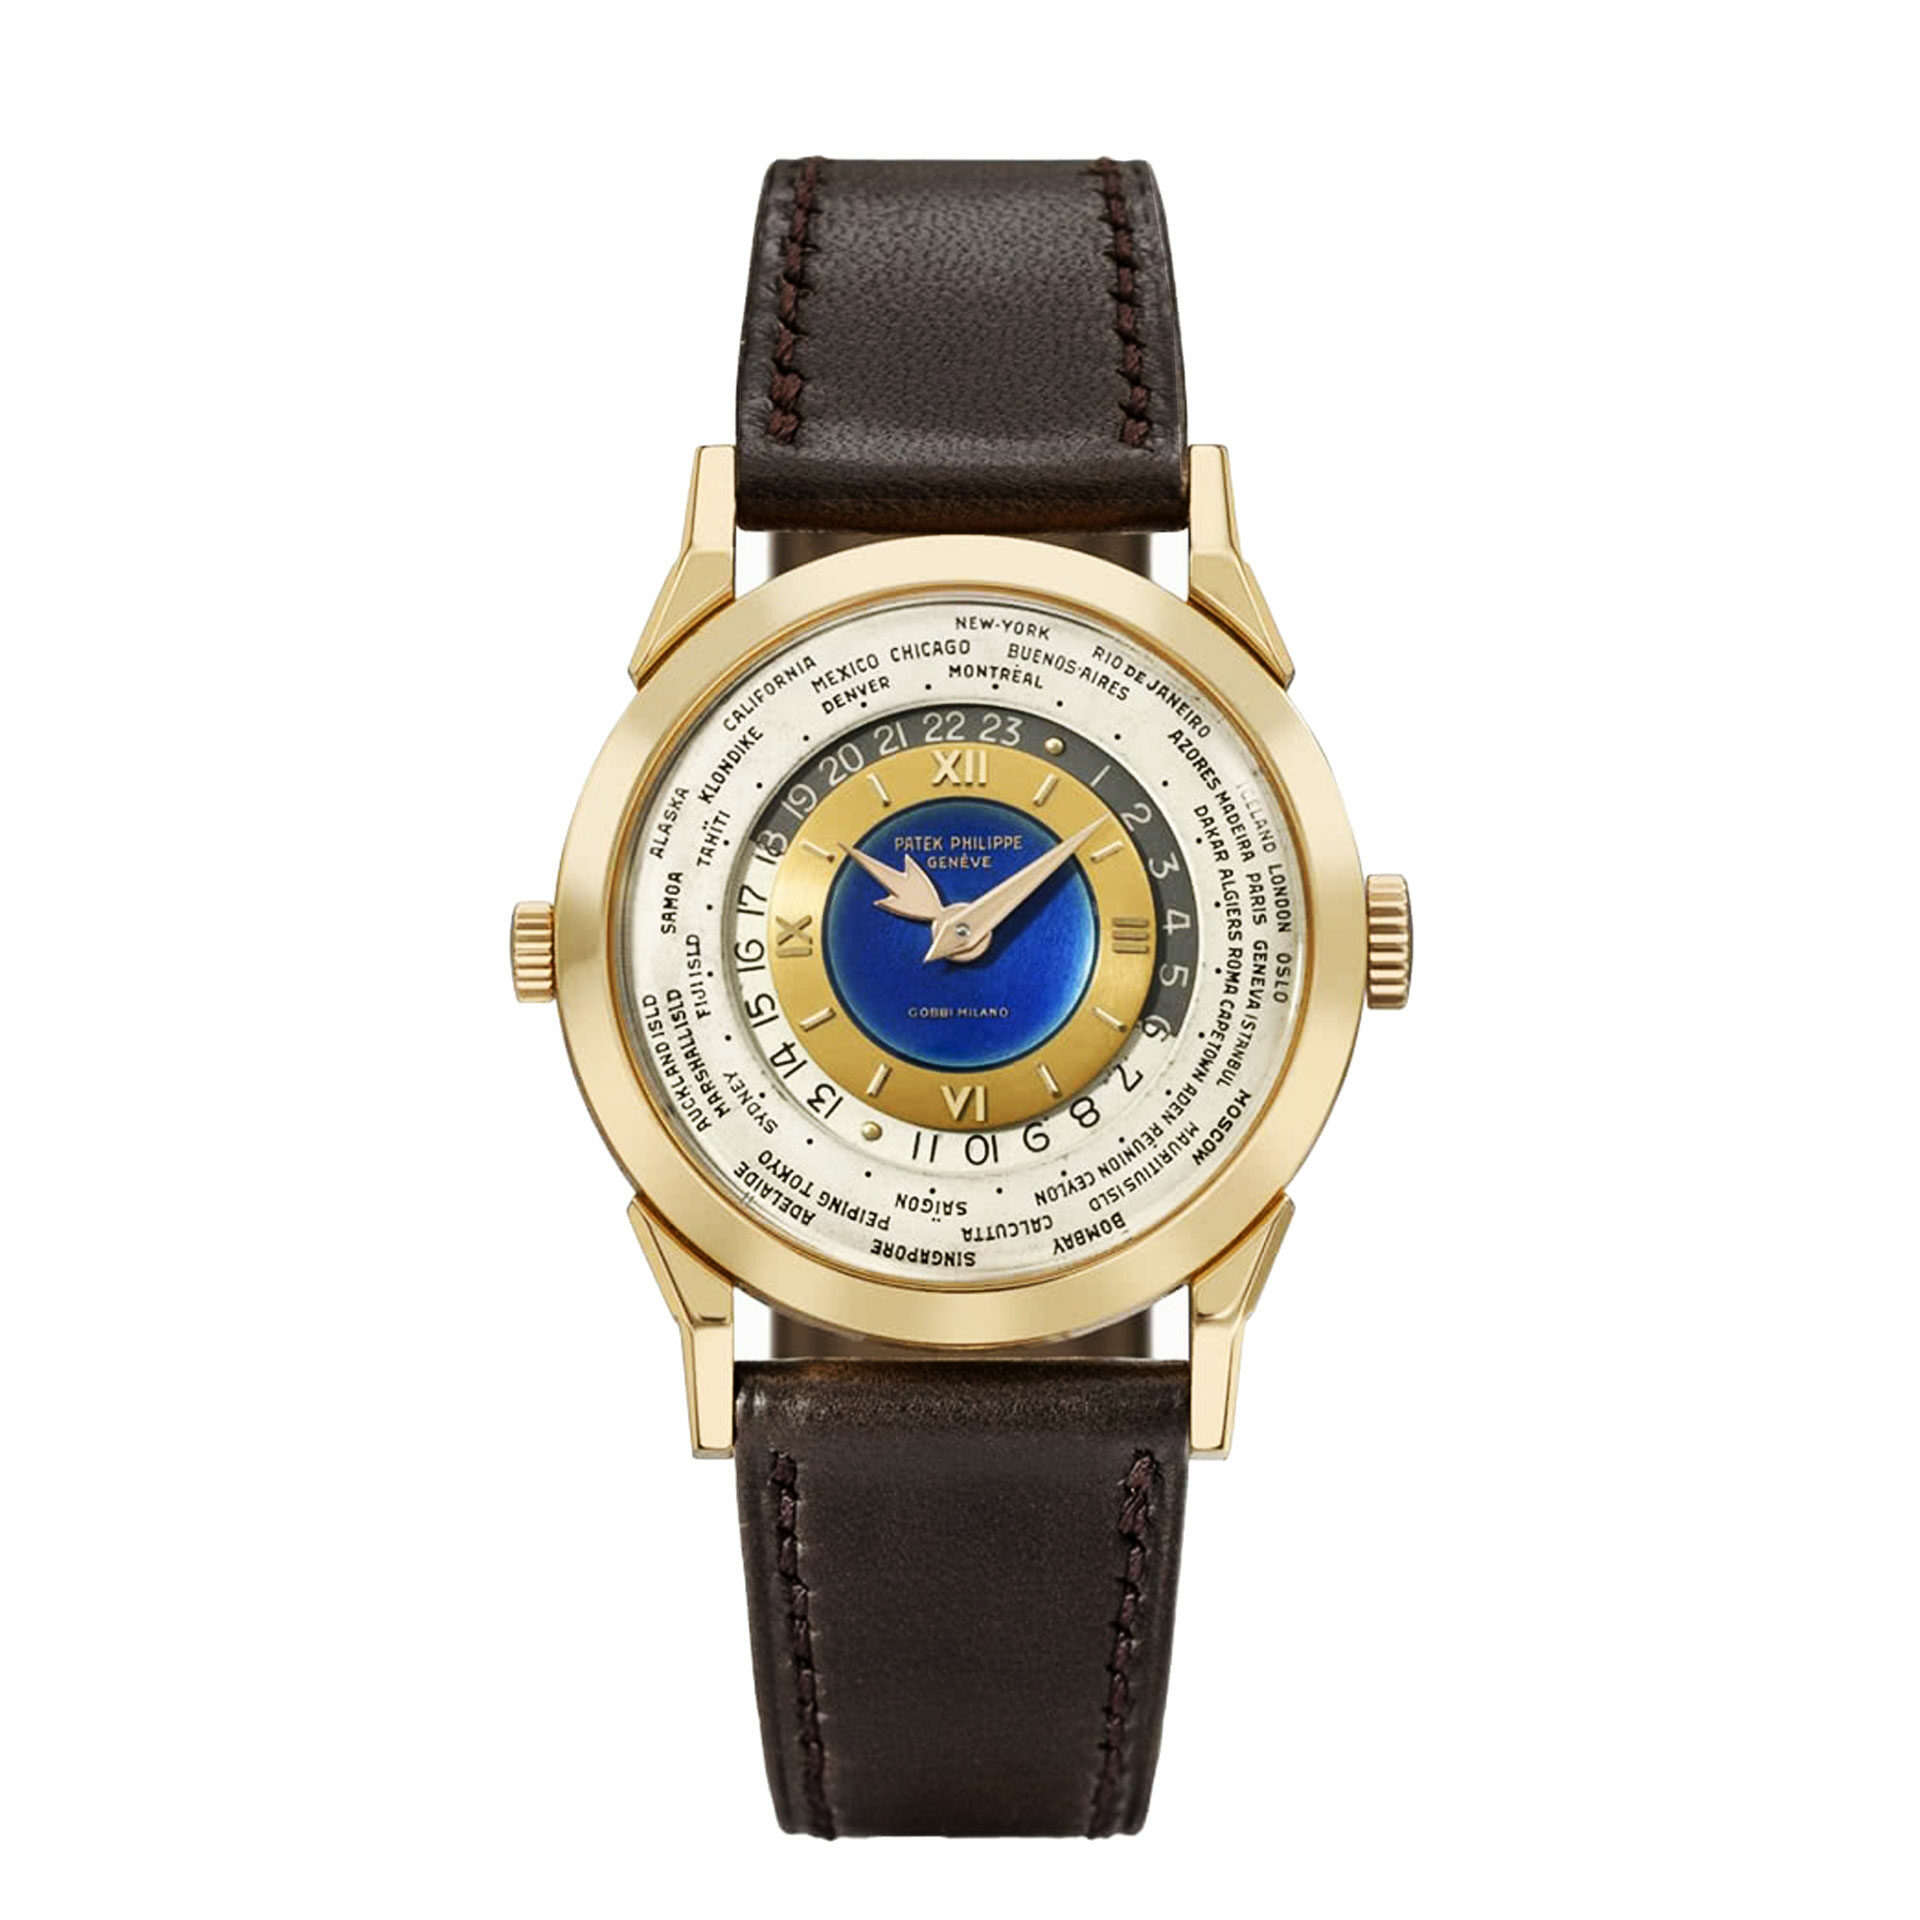 Patek Philippe Ref. 2523 Gobbi Milan 1948 - most expensive watch in the world